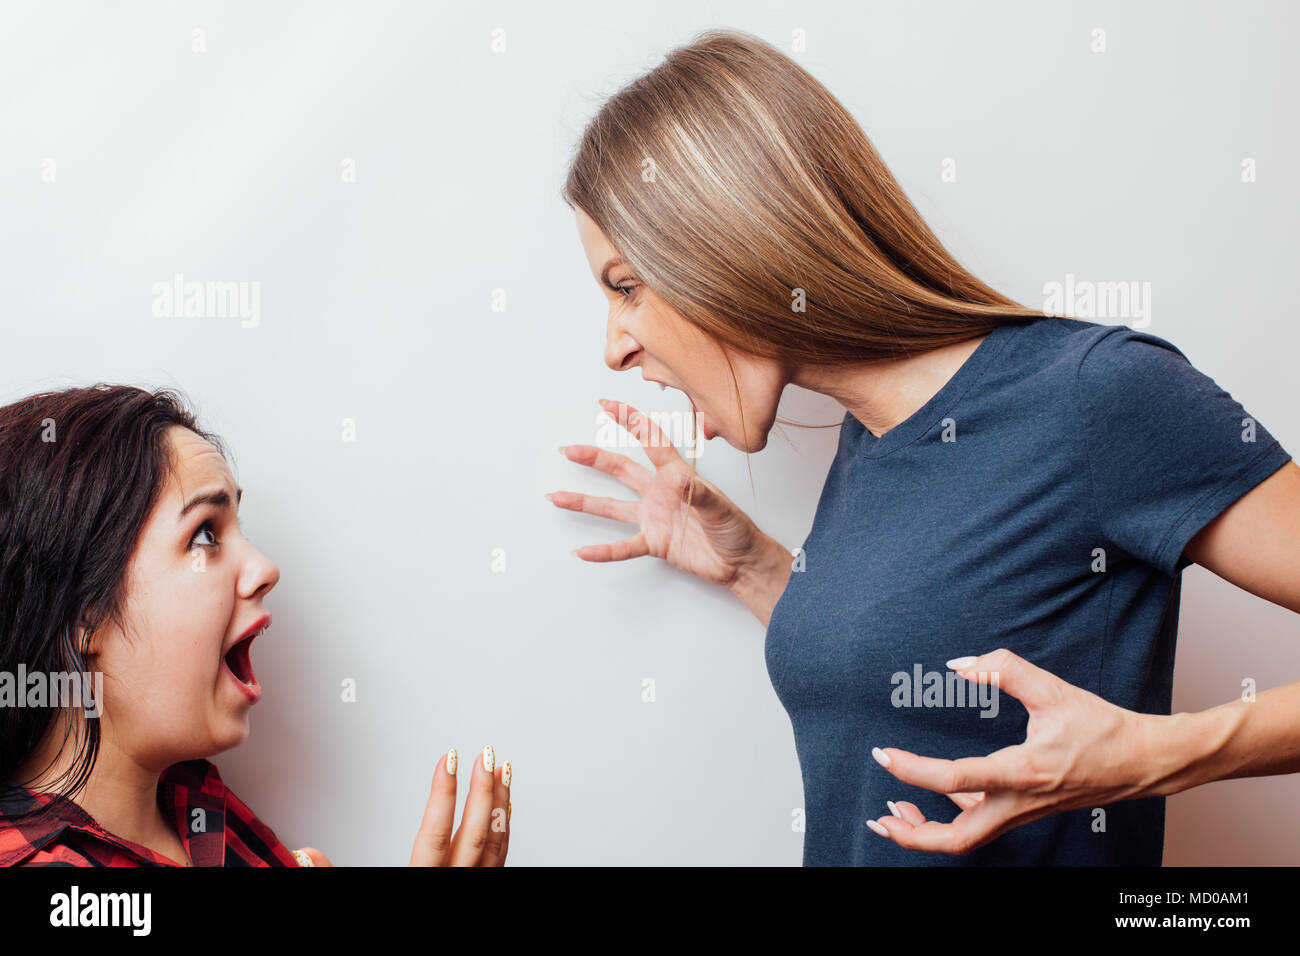 Screaming, hate, rage.  Emotional, young face. Female half-length portrait. Human emotions, facial expression concept. Stock Photo